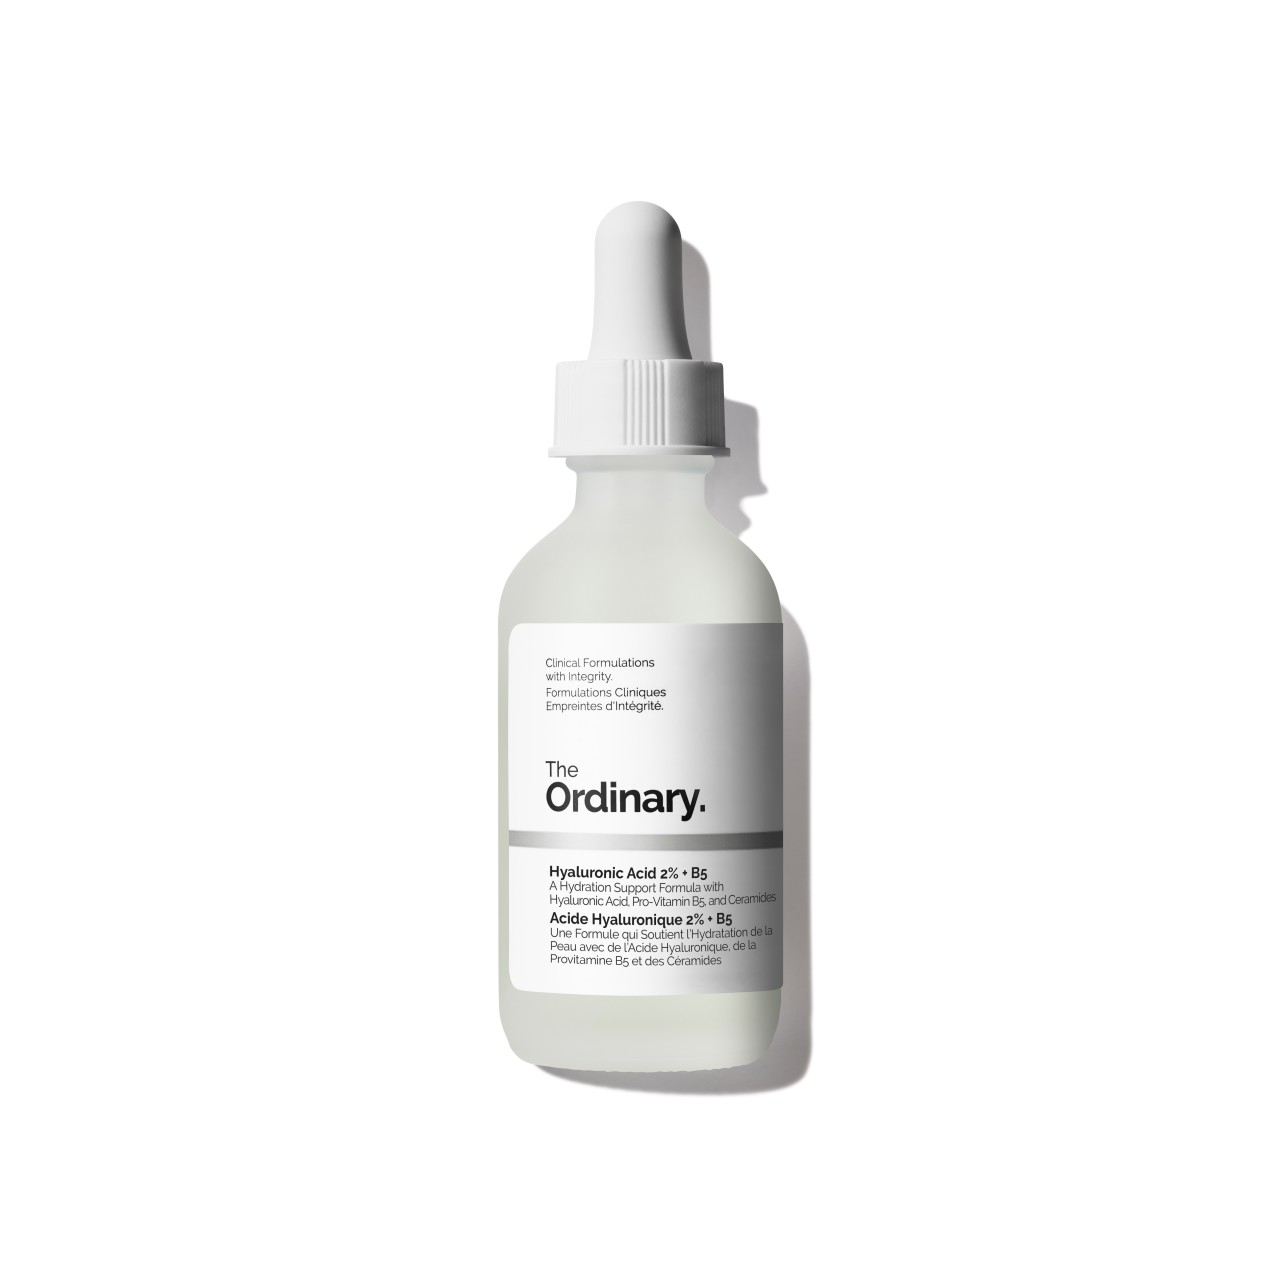 The Ordinary - Hyaluronic Acid 2 -  60ML